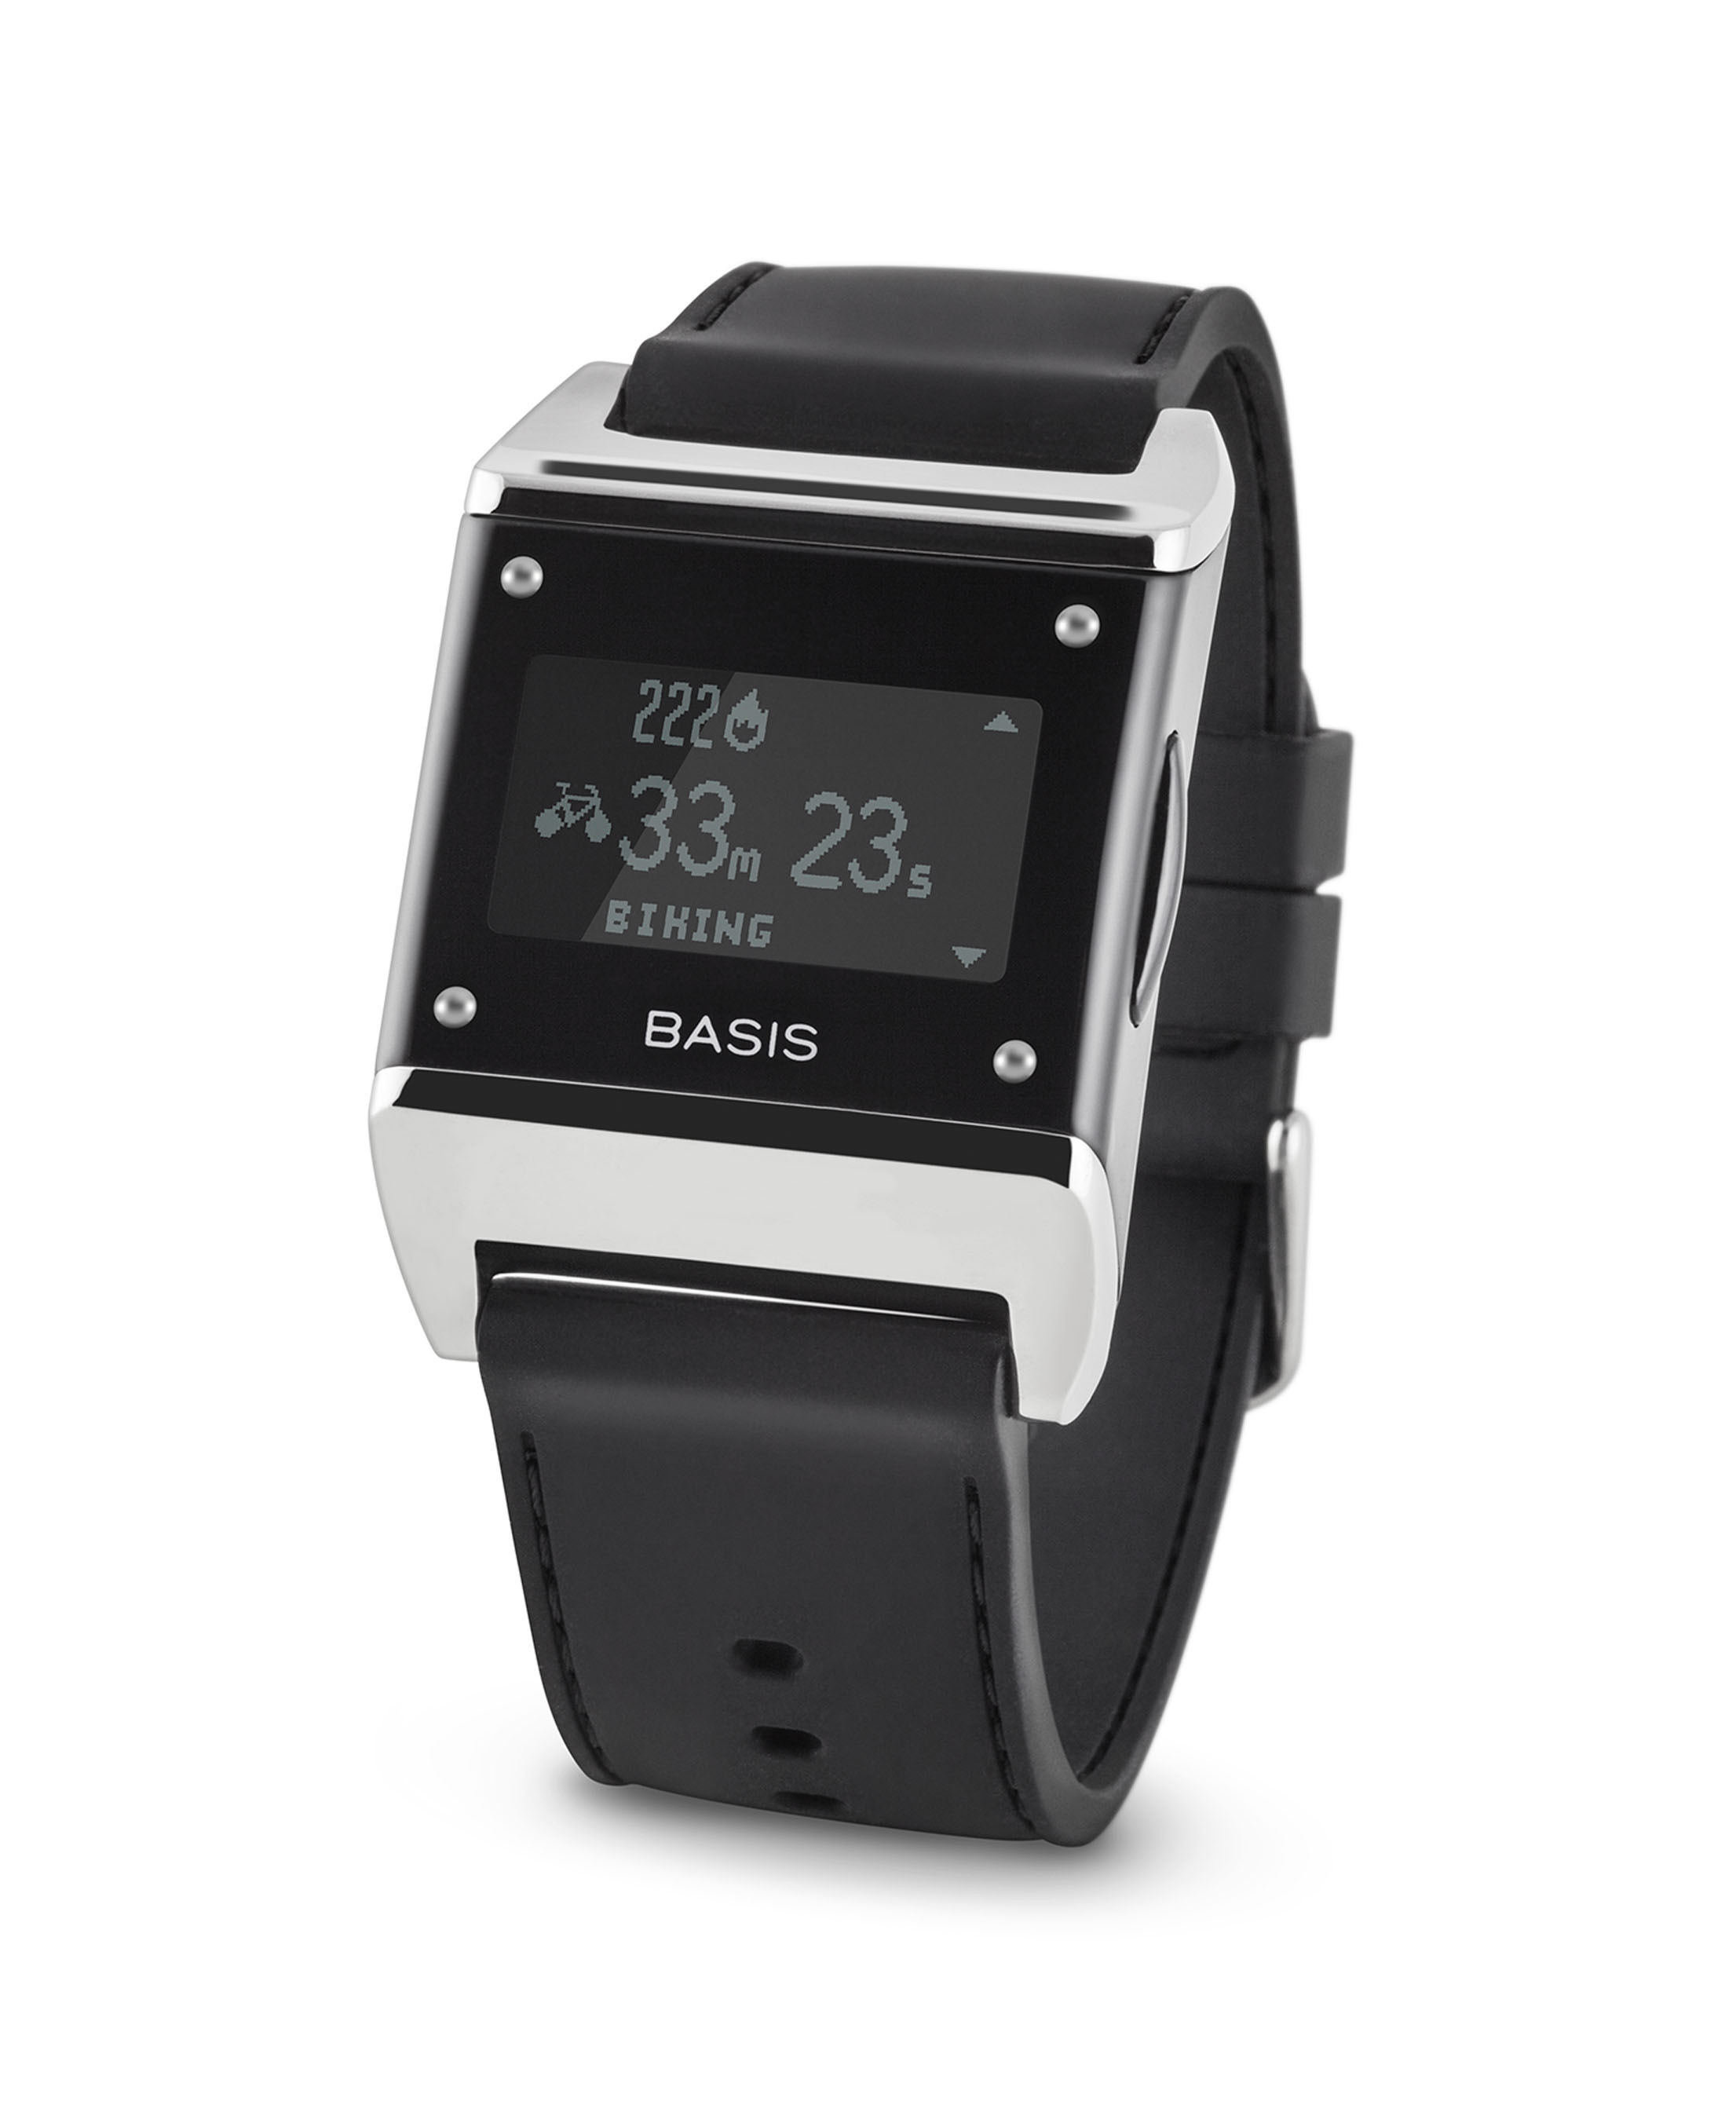 Basis Announces Most Advanced Sleep Analytics Among Health Trackers and New 2014 Carbon Steel Edition. (PRNewsFoto/BASIS Science, Inc.) (PRNewsFoto/BASIS SCIENCE, INC.)